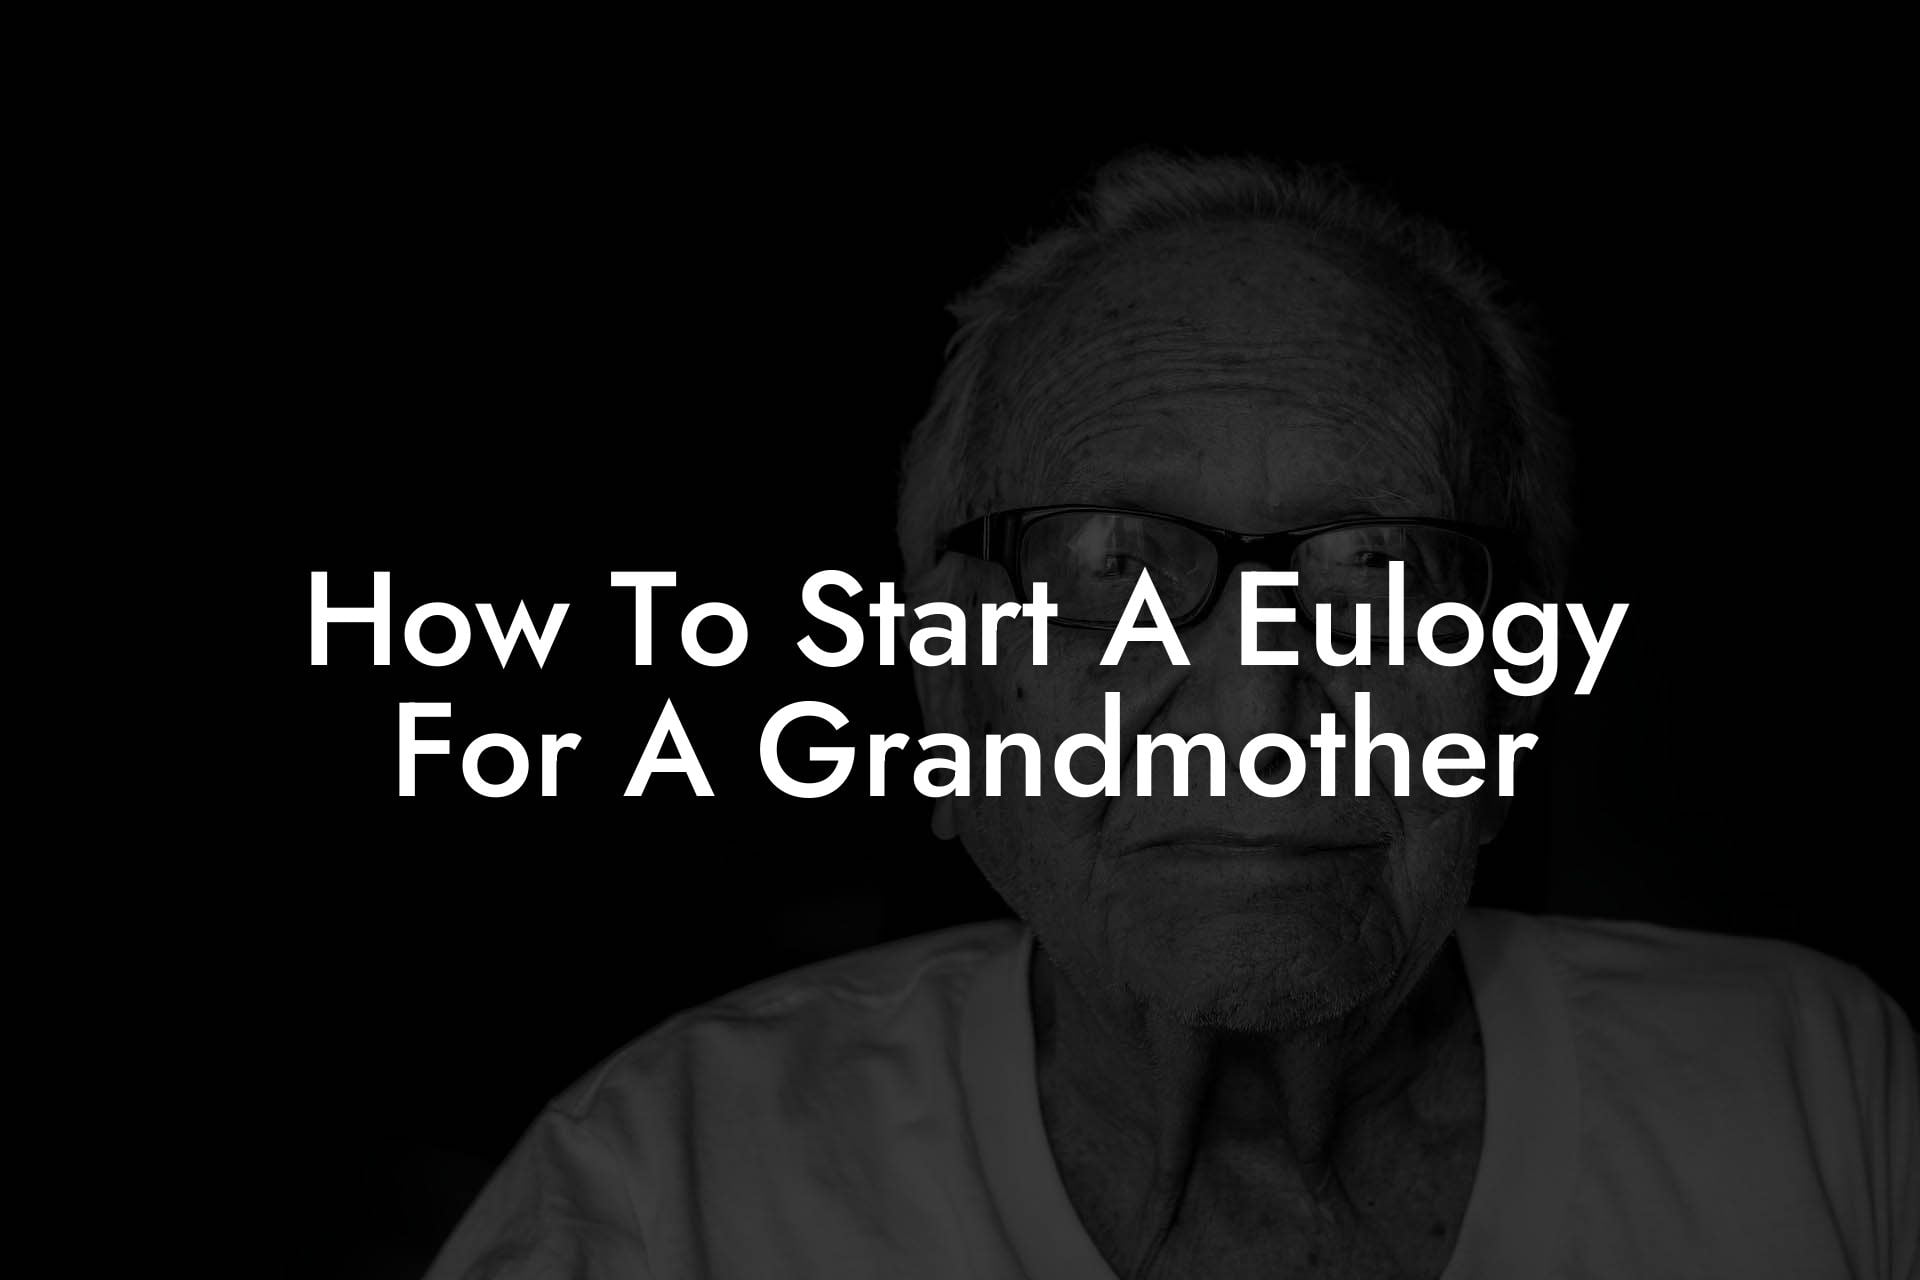 How To Start A Eulogy For A Grandmother